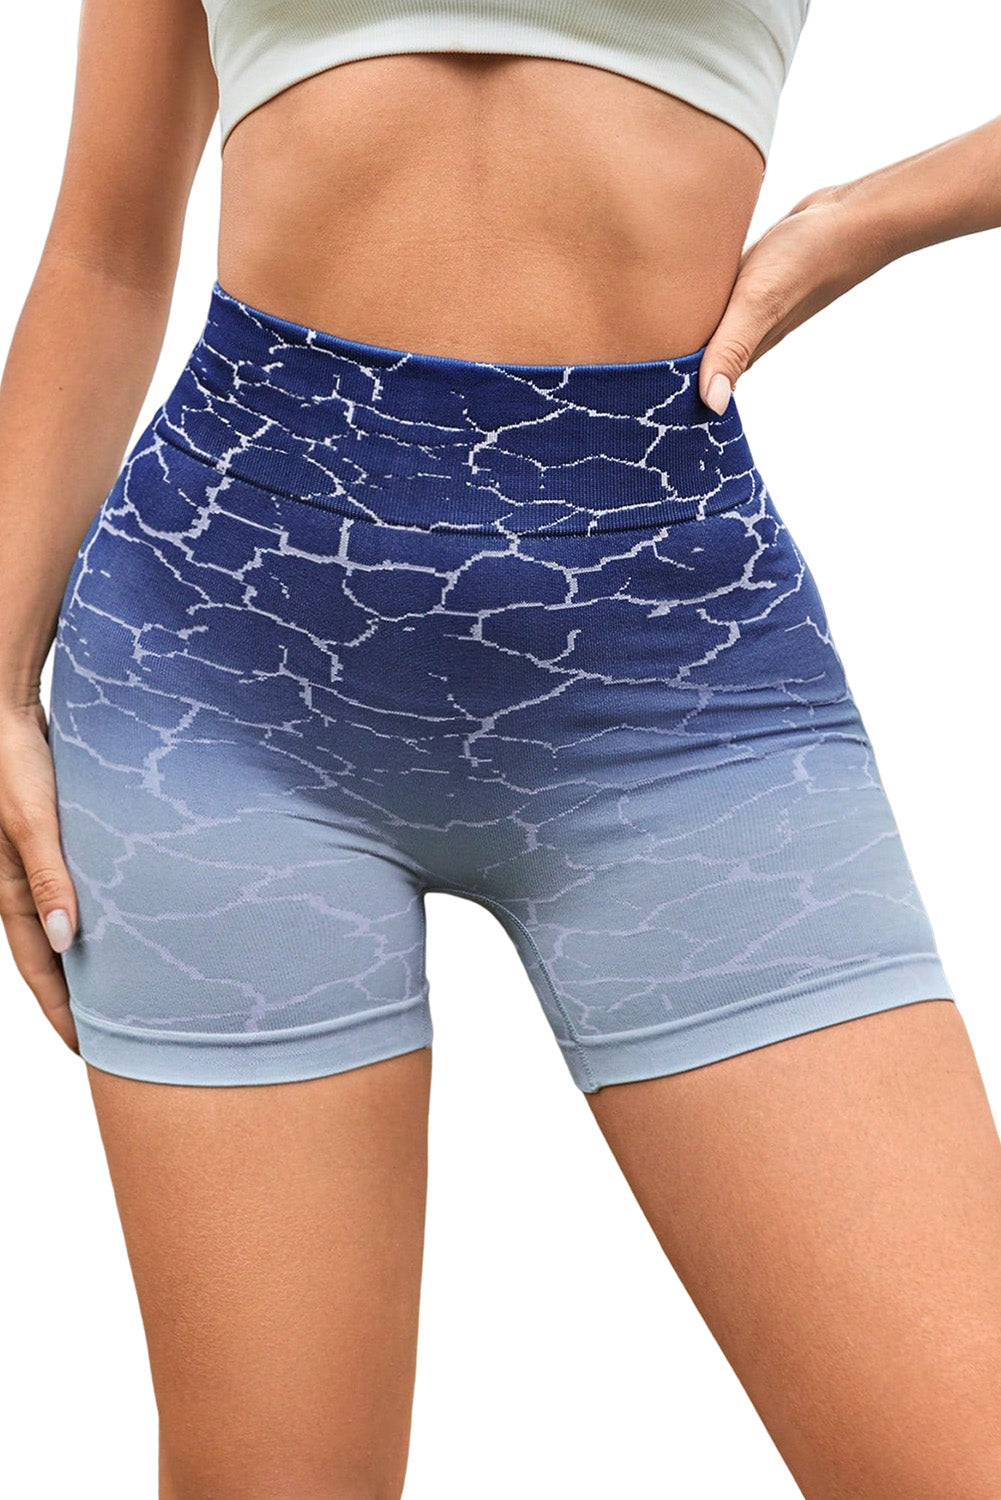 Sky Blue Gradient Tie-dye Printed Butt-lifting Active Shorts